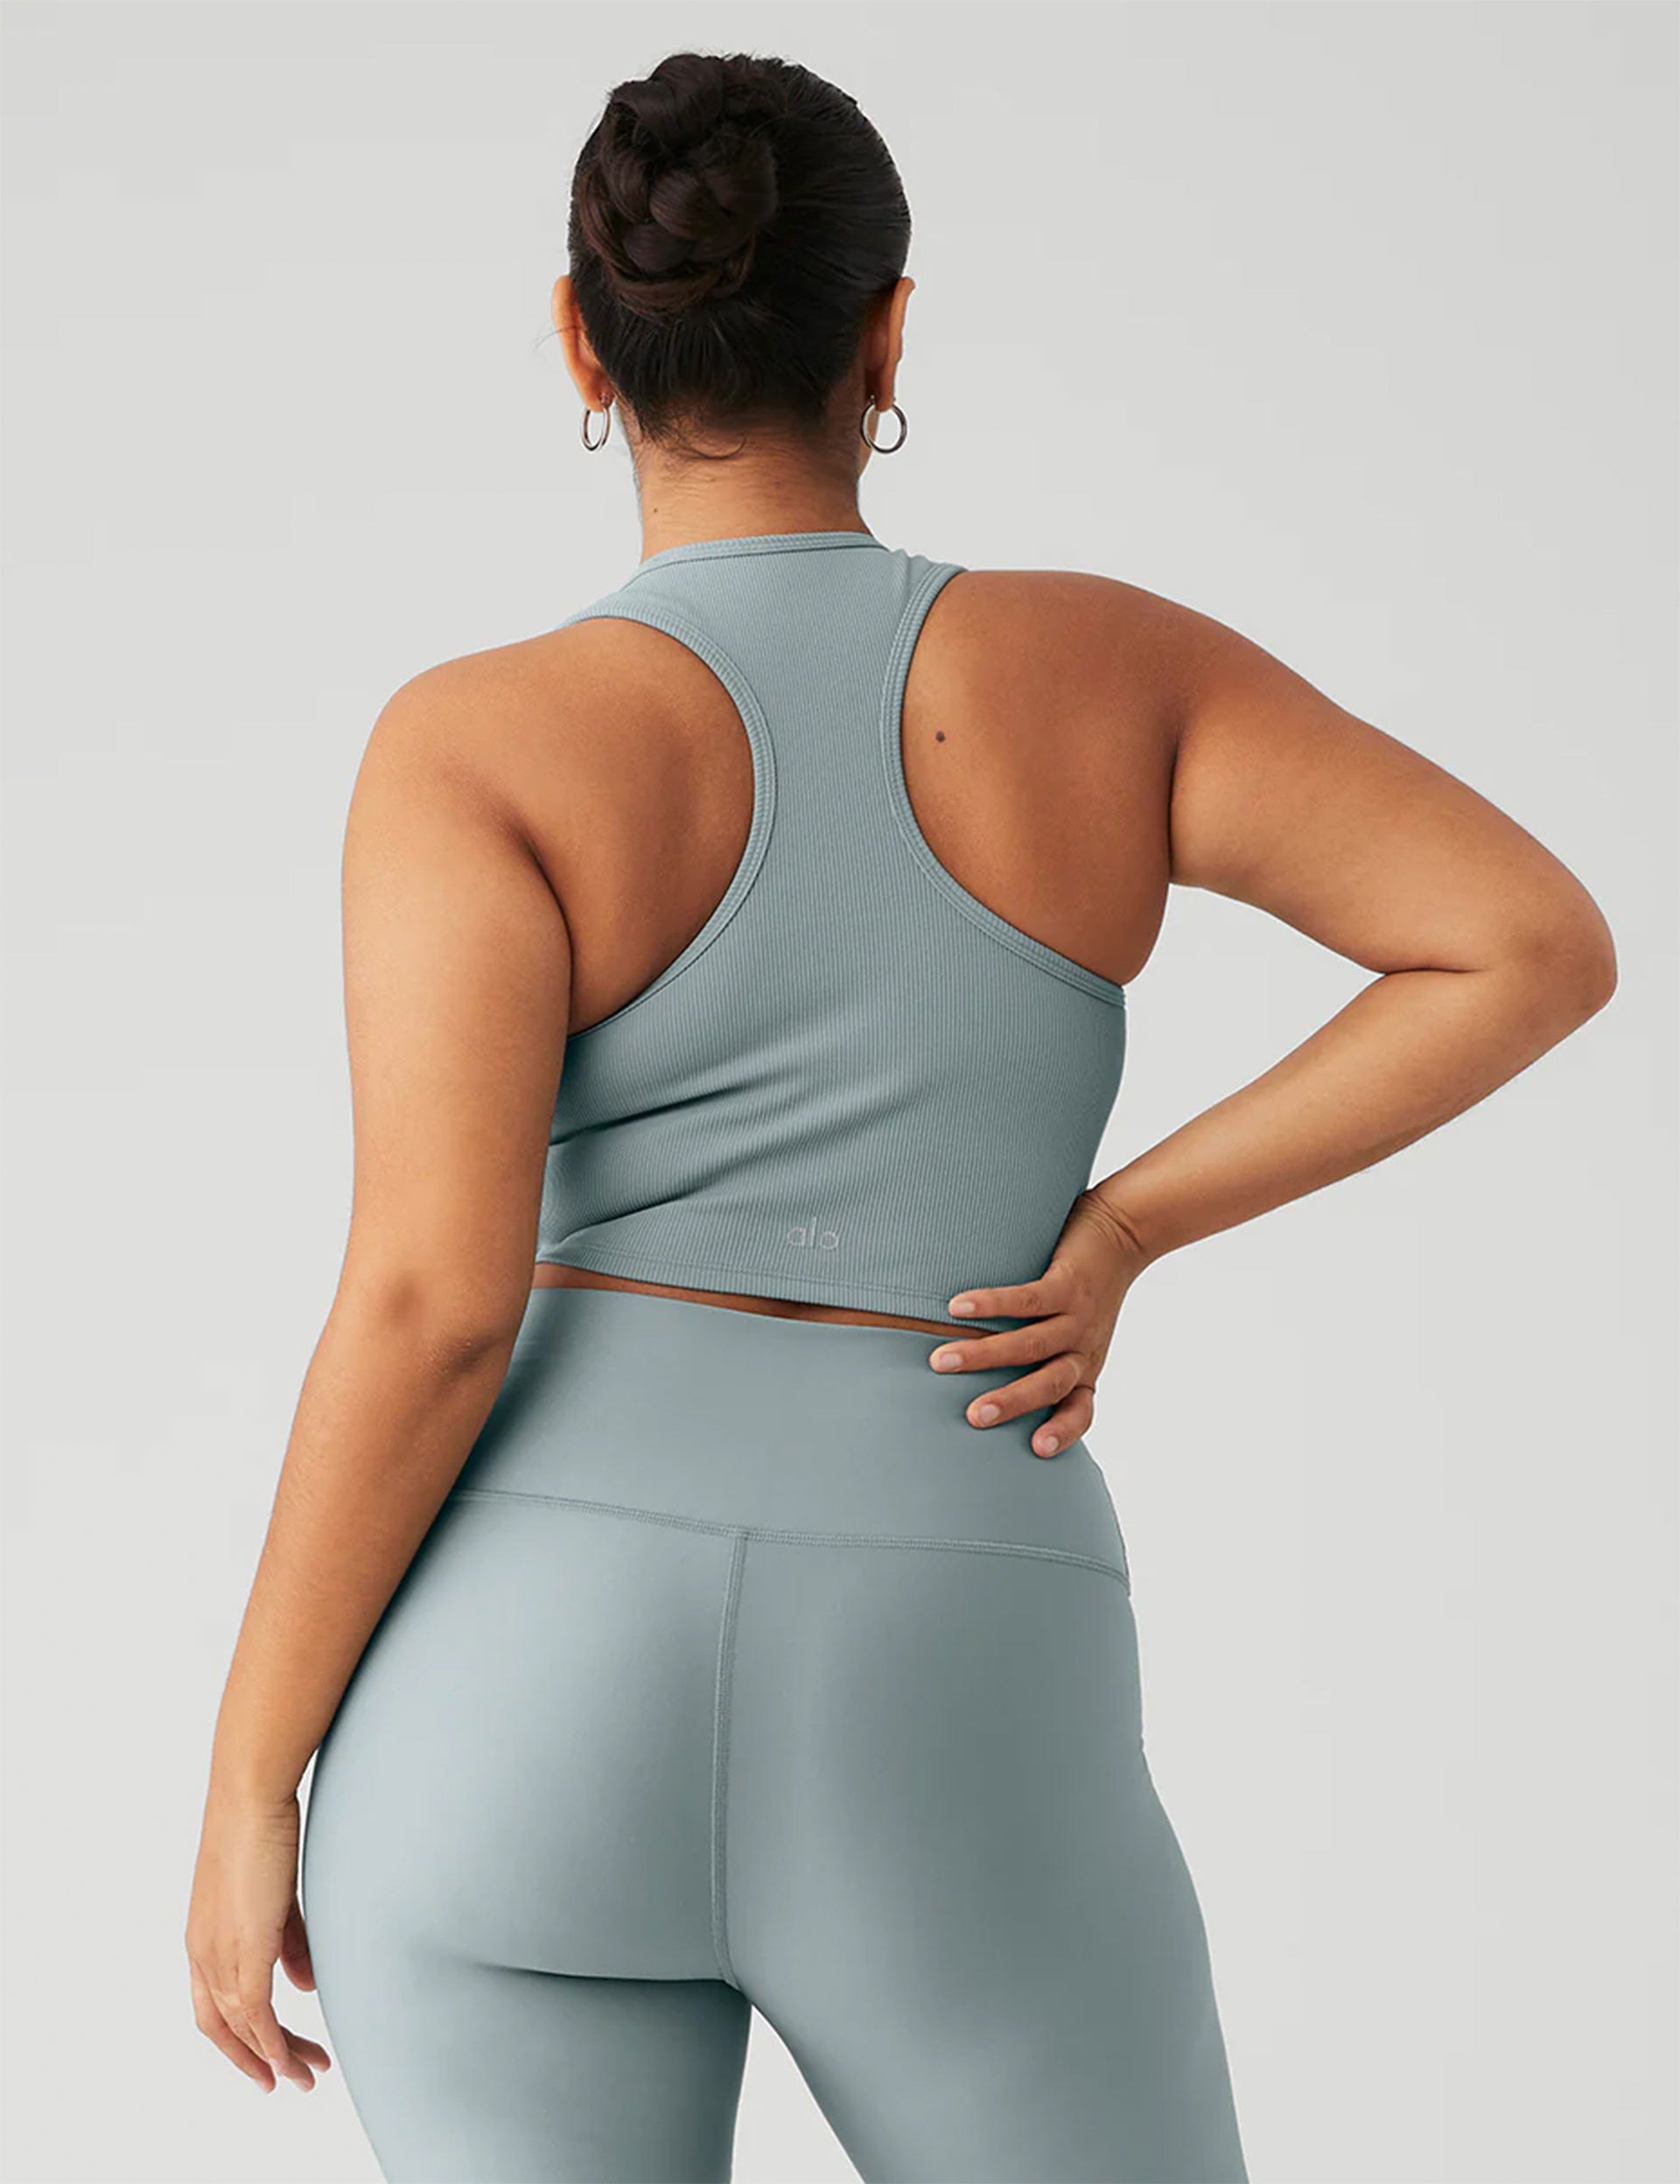 Alo Yoga Grey Rib Support Tank Top Size Small Gray - $40 (50% Off Retail) -  From Kriti